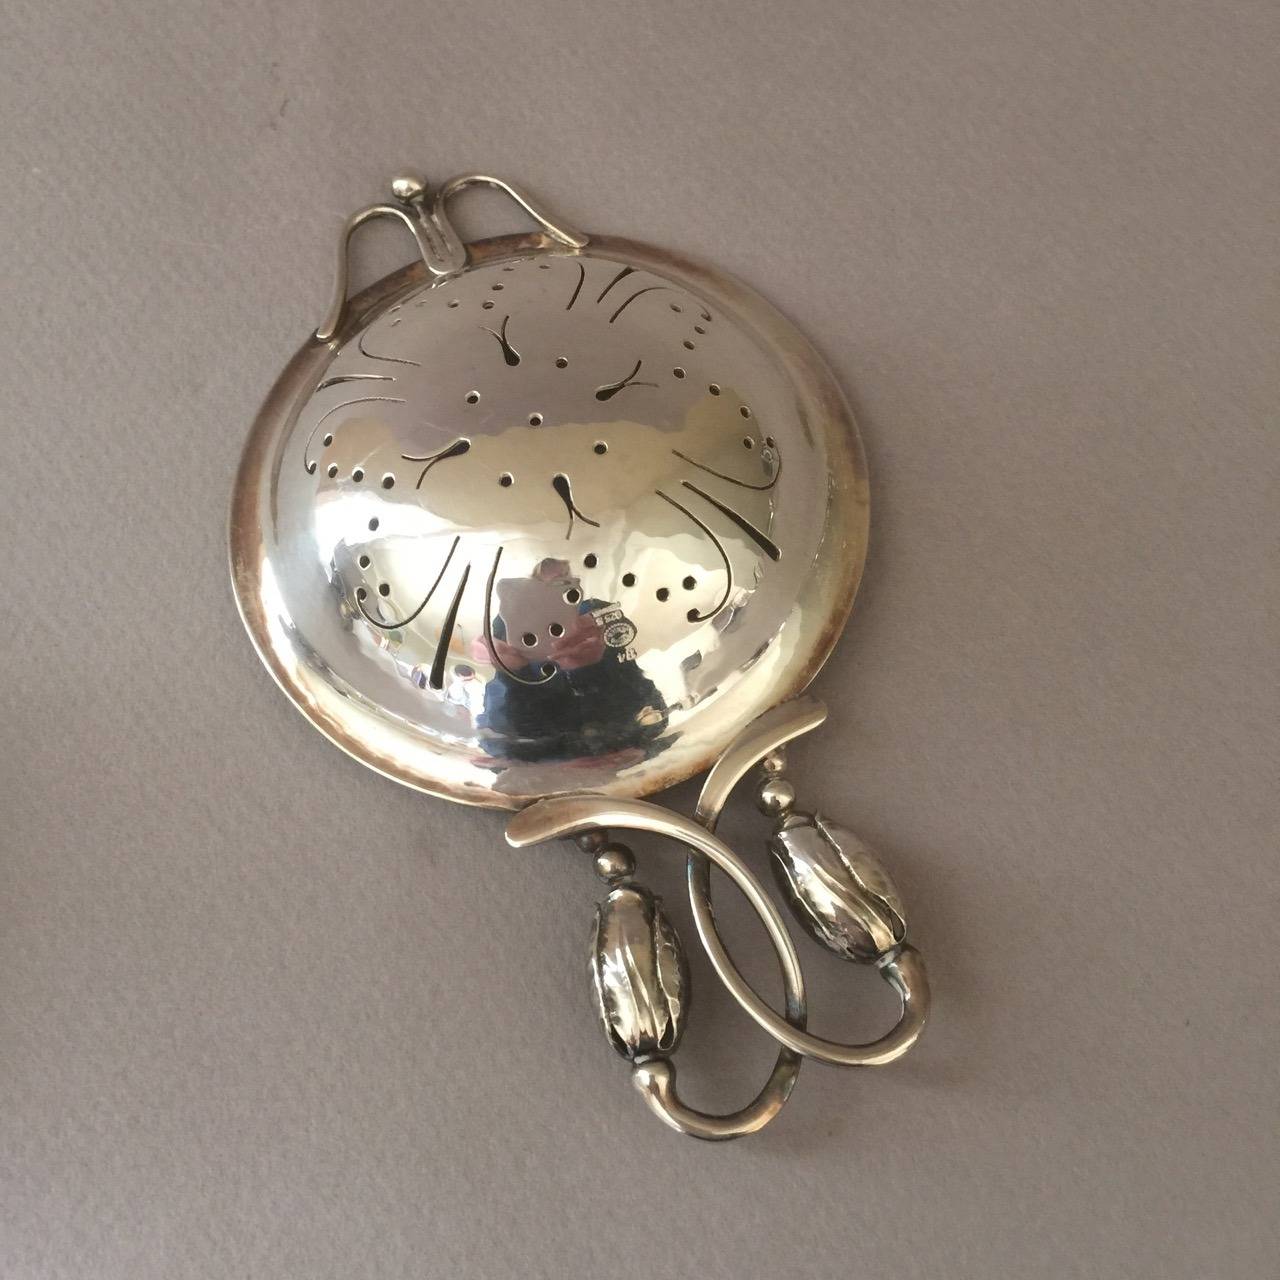 Georg Jensen Blossom Tea Strainer on Stand

Exquisitely handmade with scrolled handle terminating into two blossoms on a pierced bowl. Strainer sits perfectly on footed blossom stand. Hand hammered and in excellent condition.

Sterling silver,